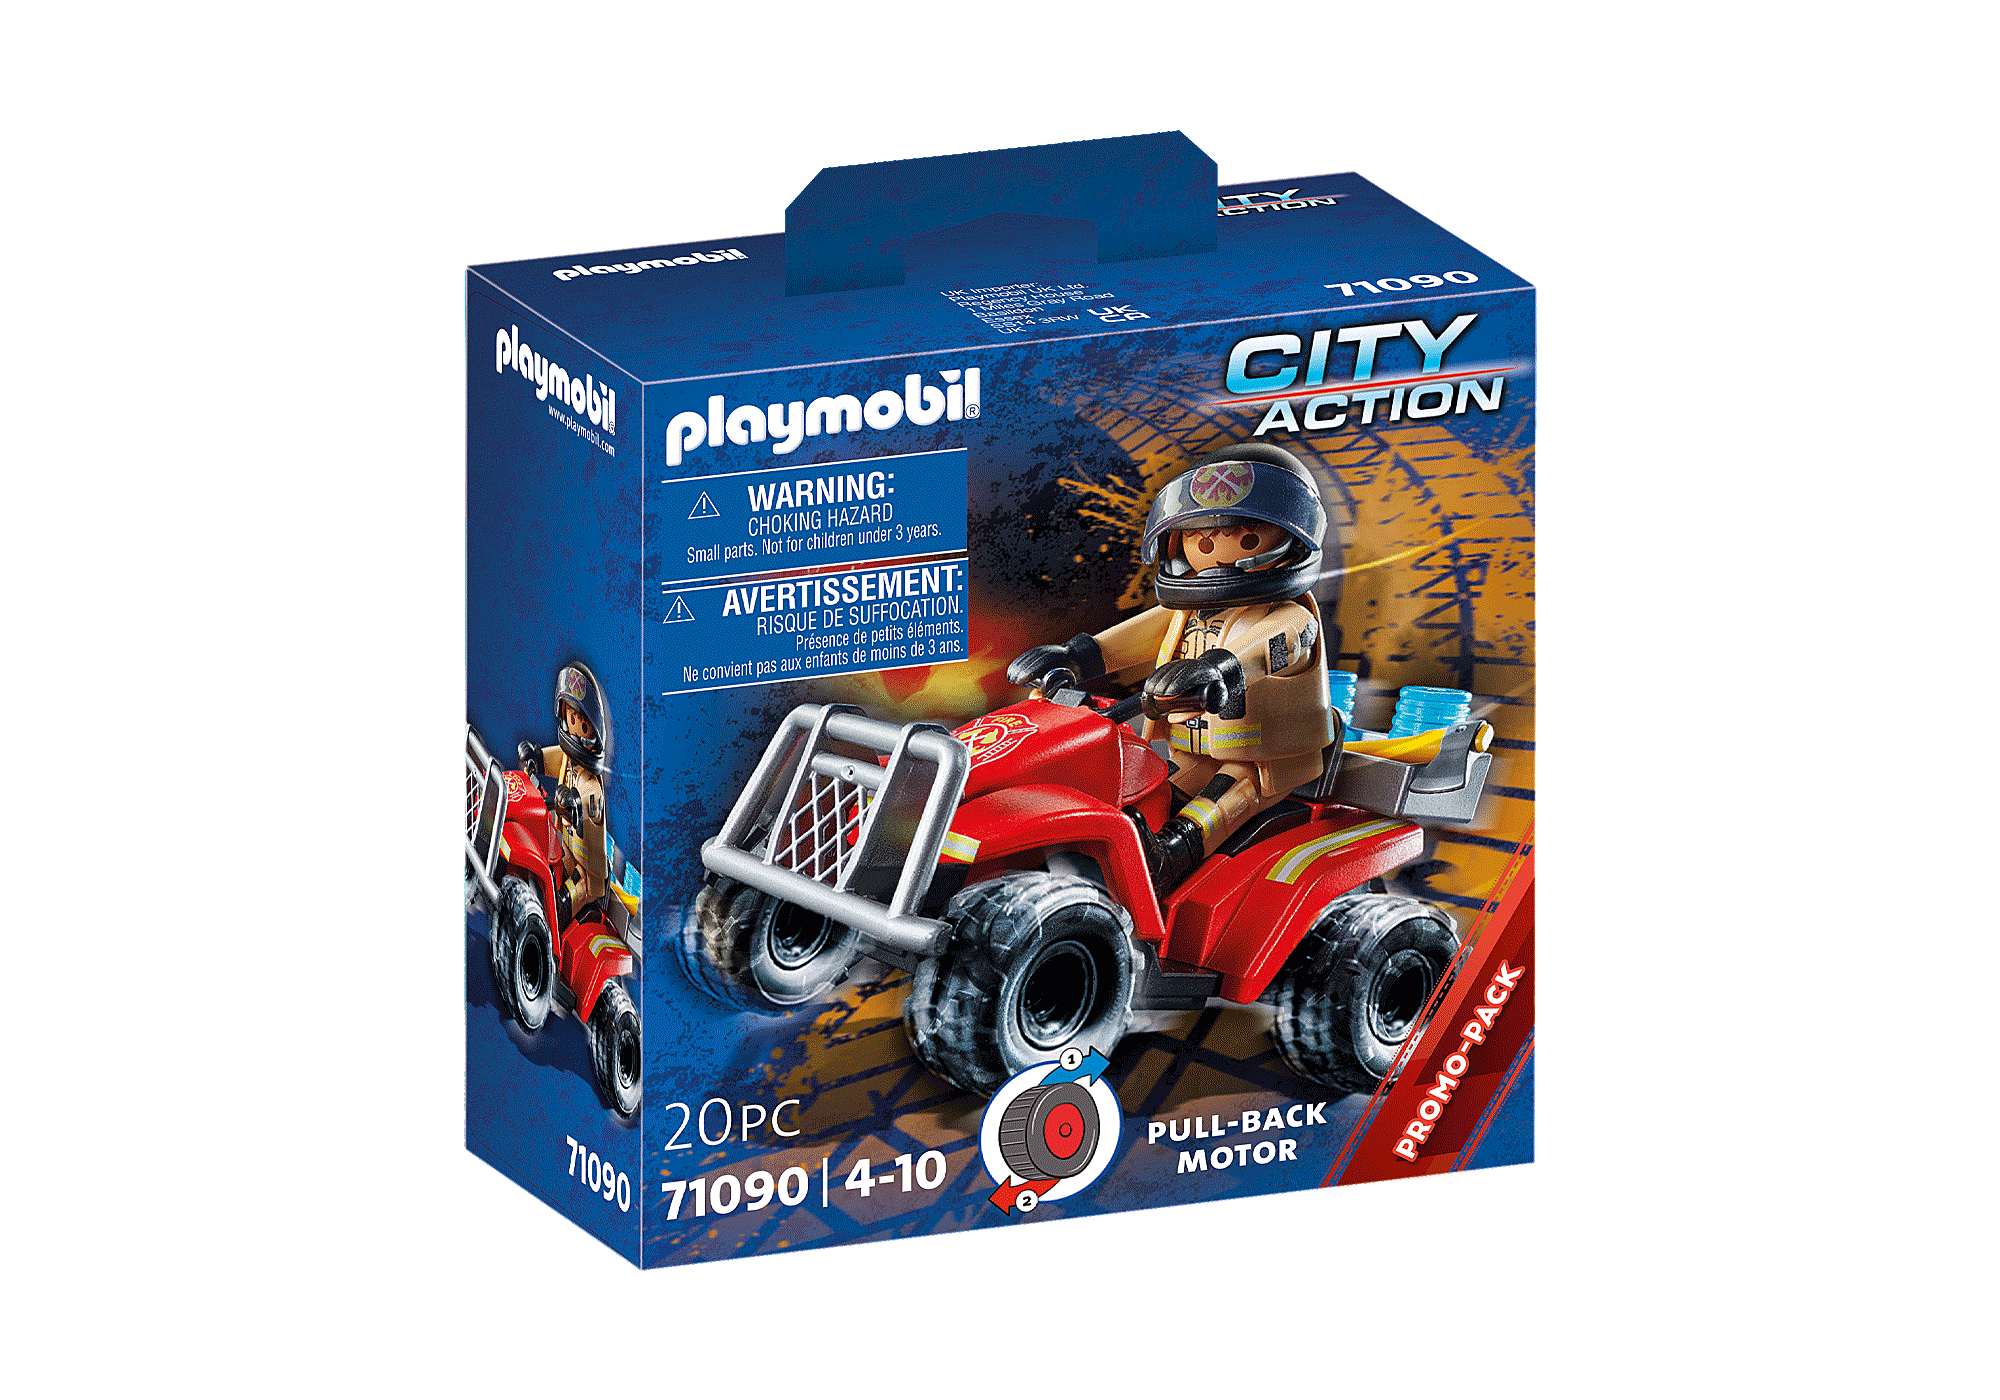 PLAYMOBIL Playmobil City Action Tactical Unit - All-terrain Vehicle - 71144  – gift tips –